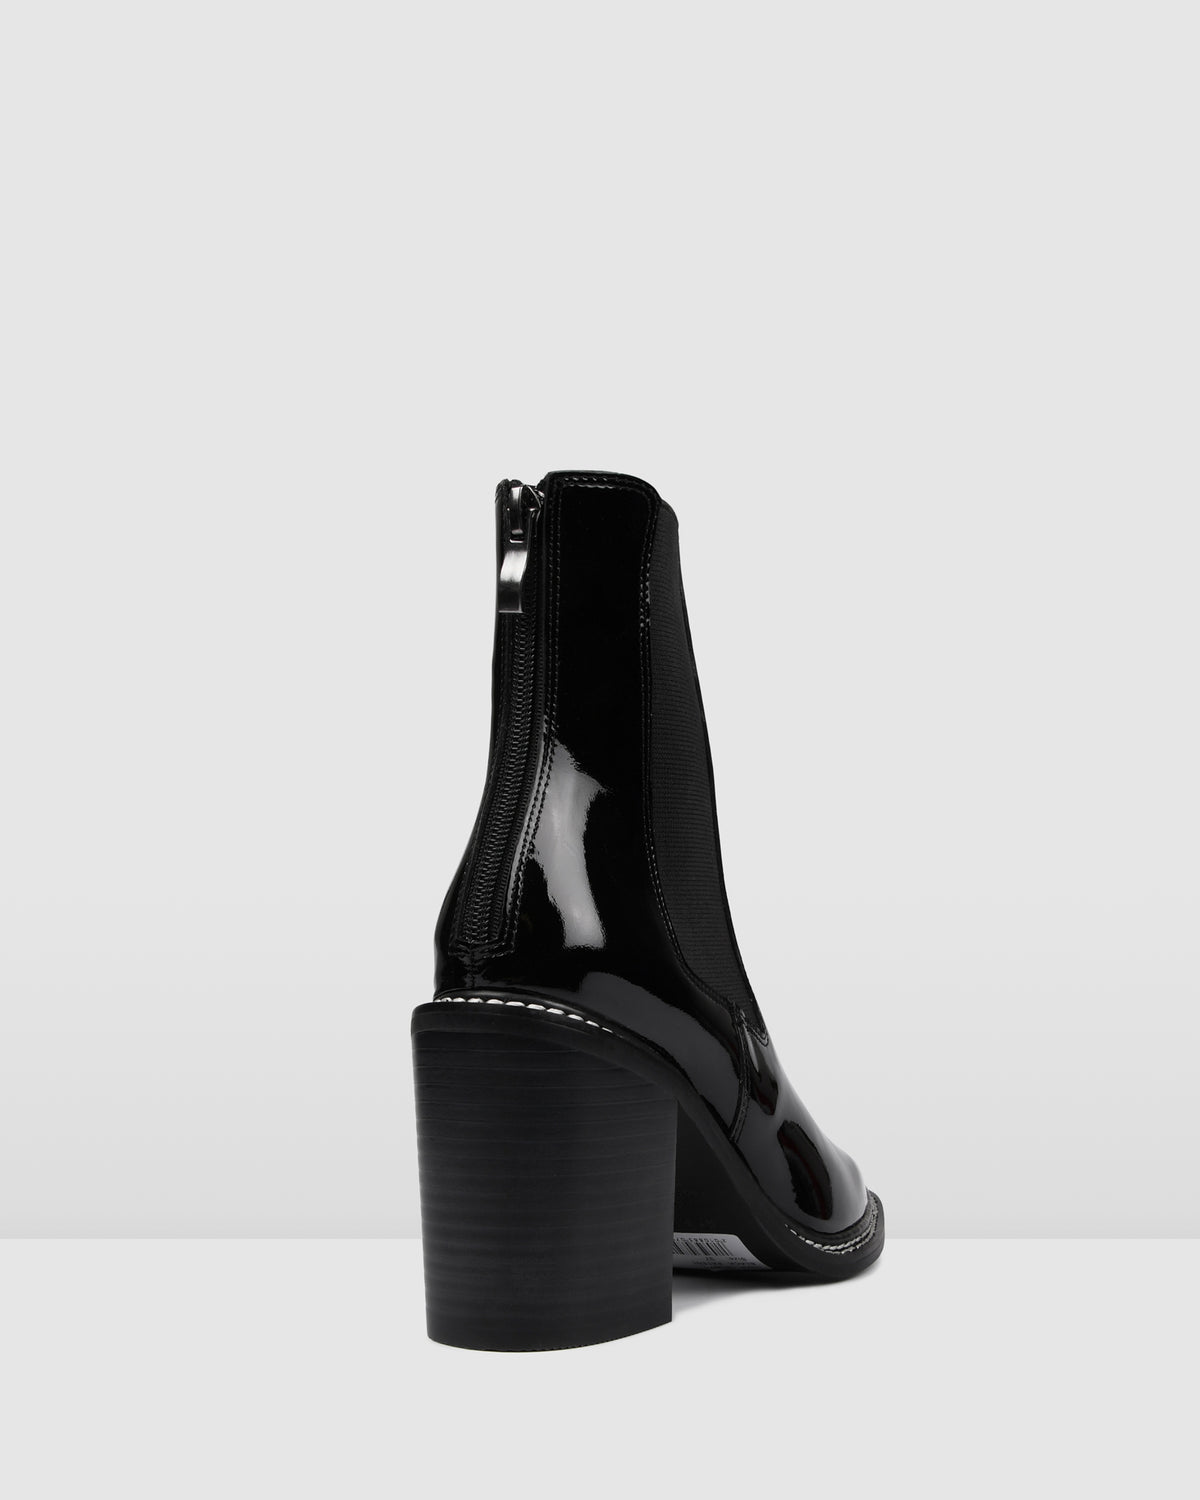 LUXE HIGH ANKLE BOOTS BLACK PATENT